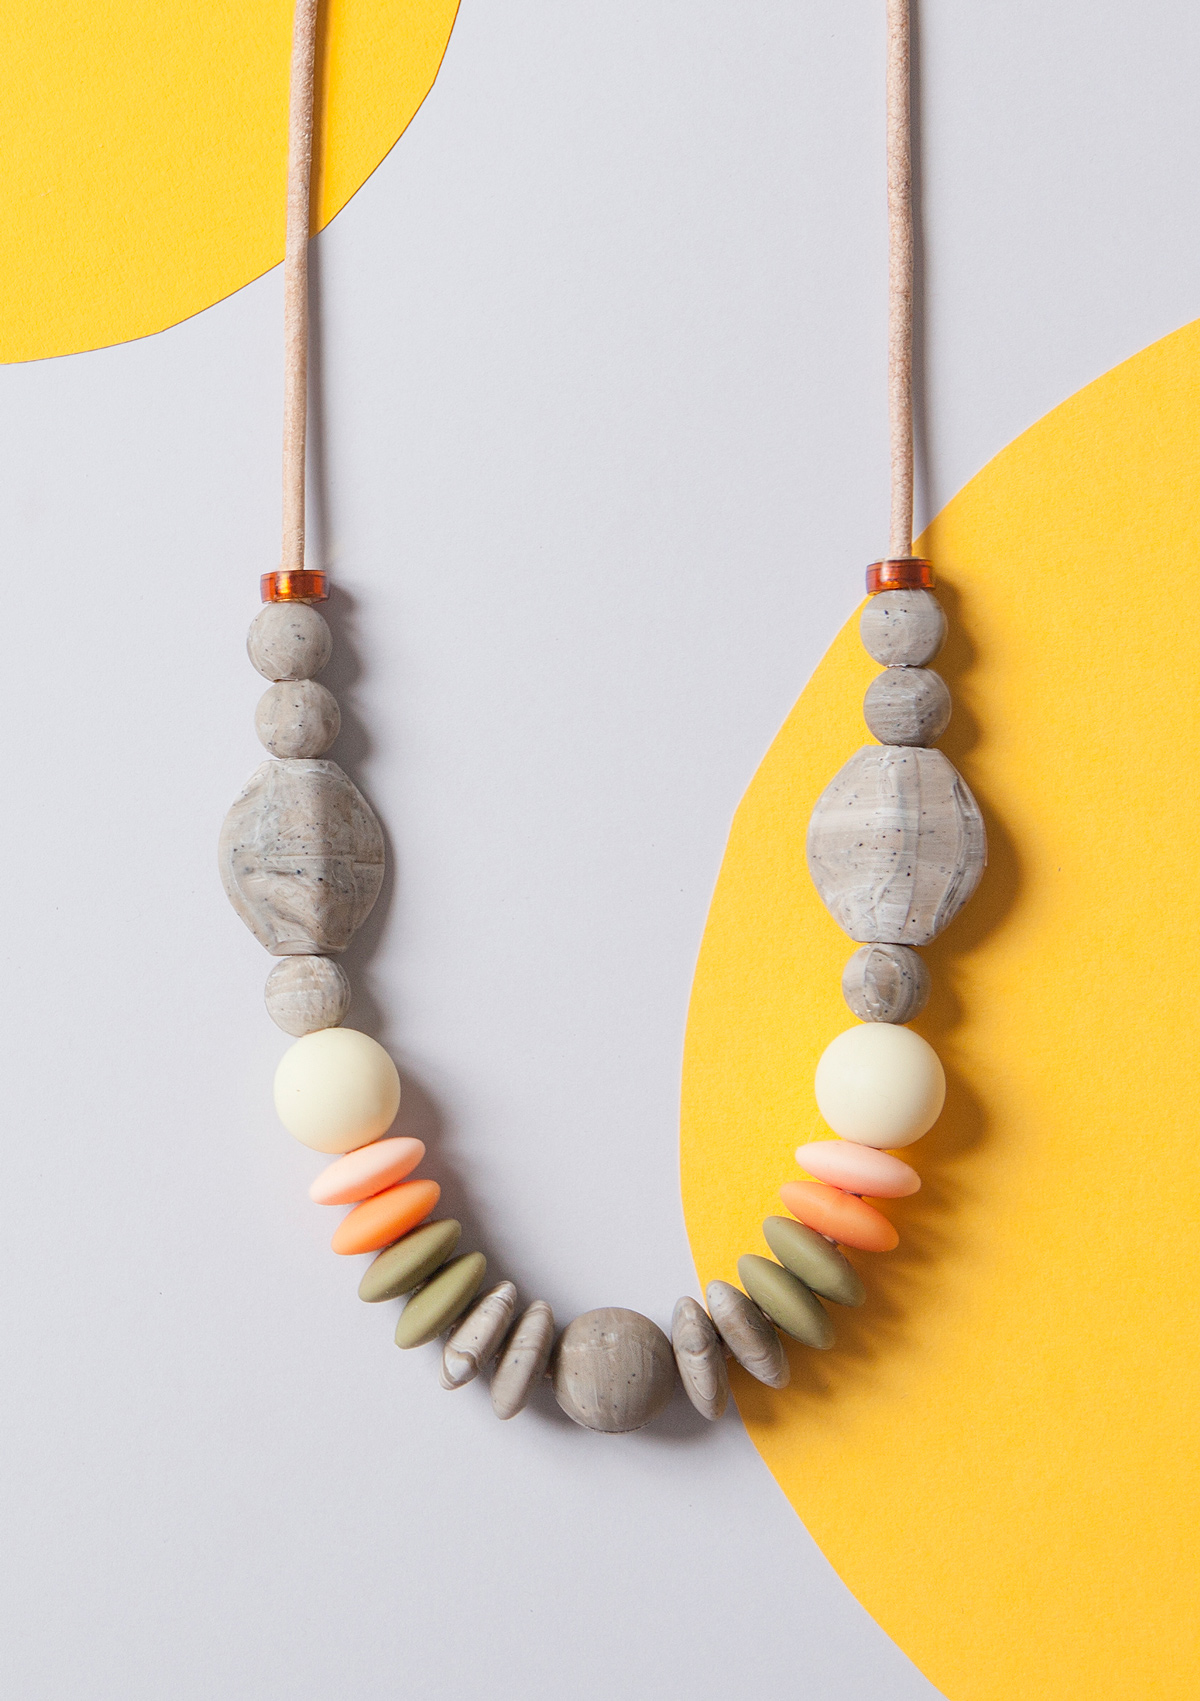 Art direction for teething jewellery brand January Moon by Perky Bros